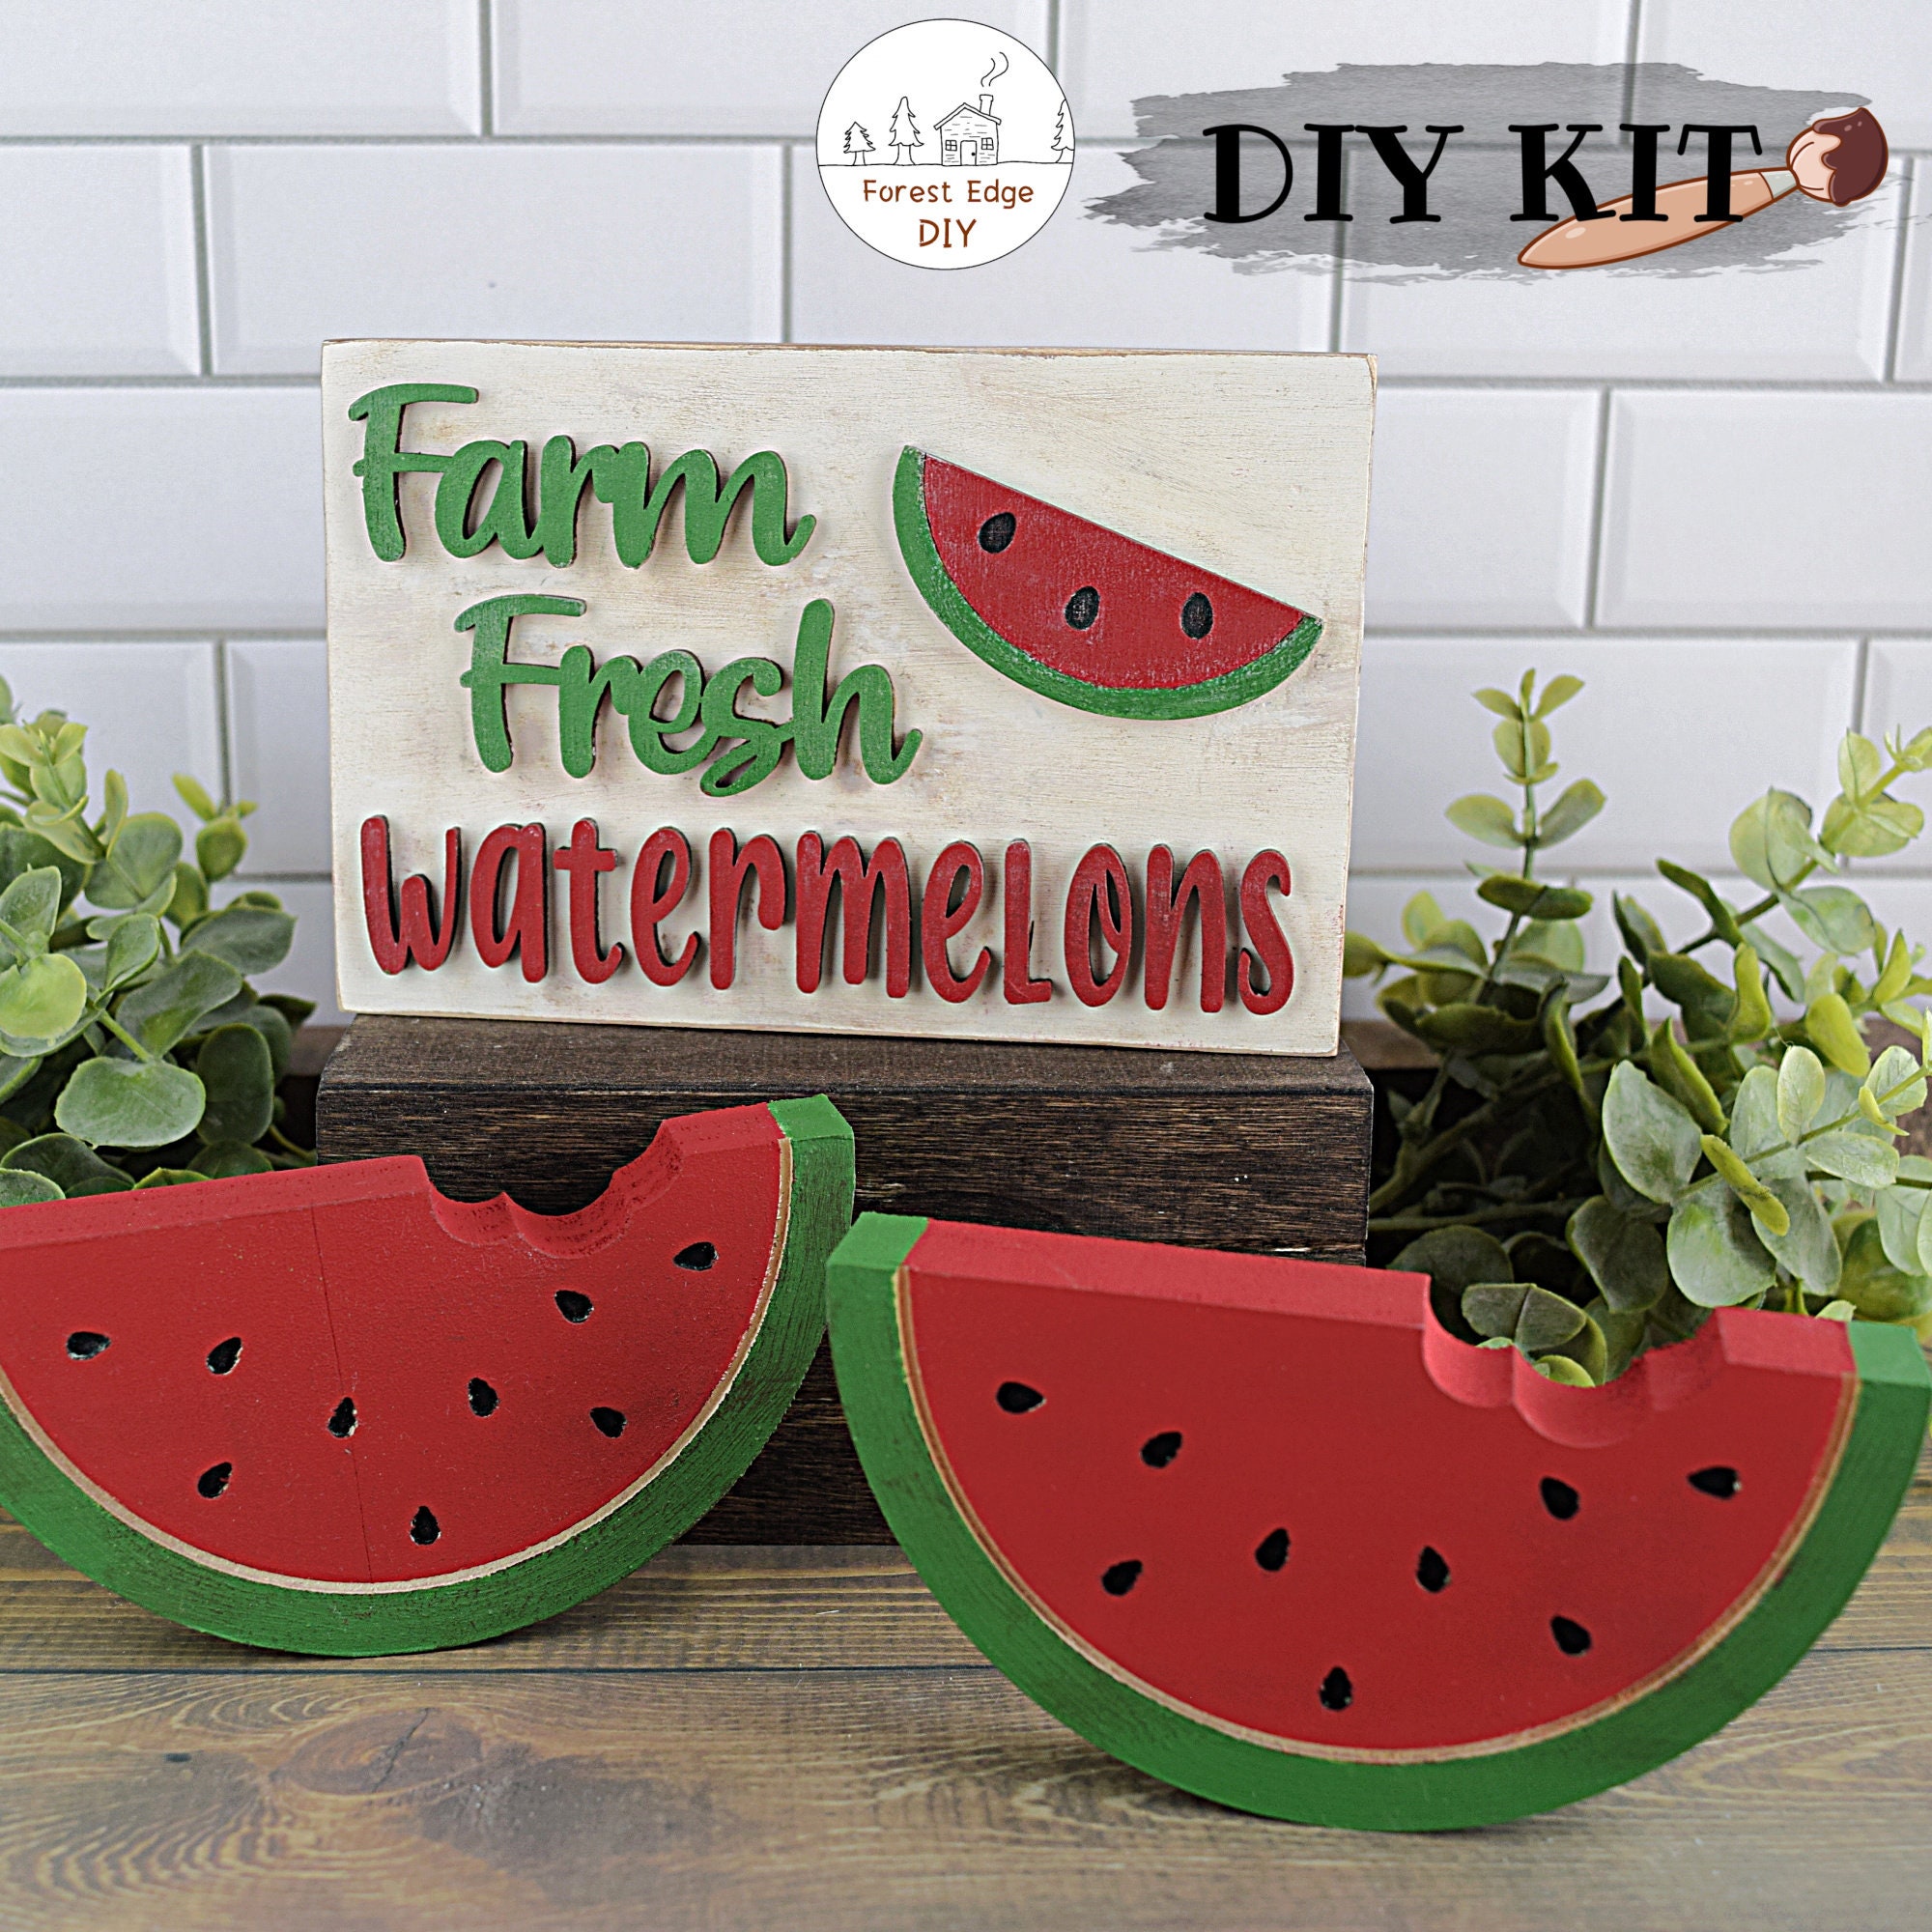 Wood Canvas Painting Watermelon Craft Kit for Kids DIY Kit Home